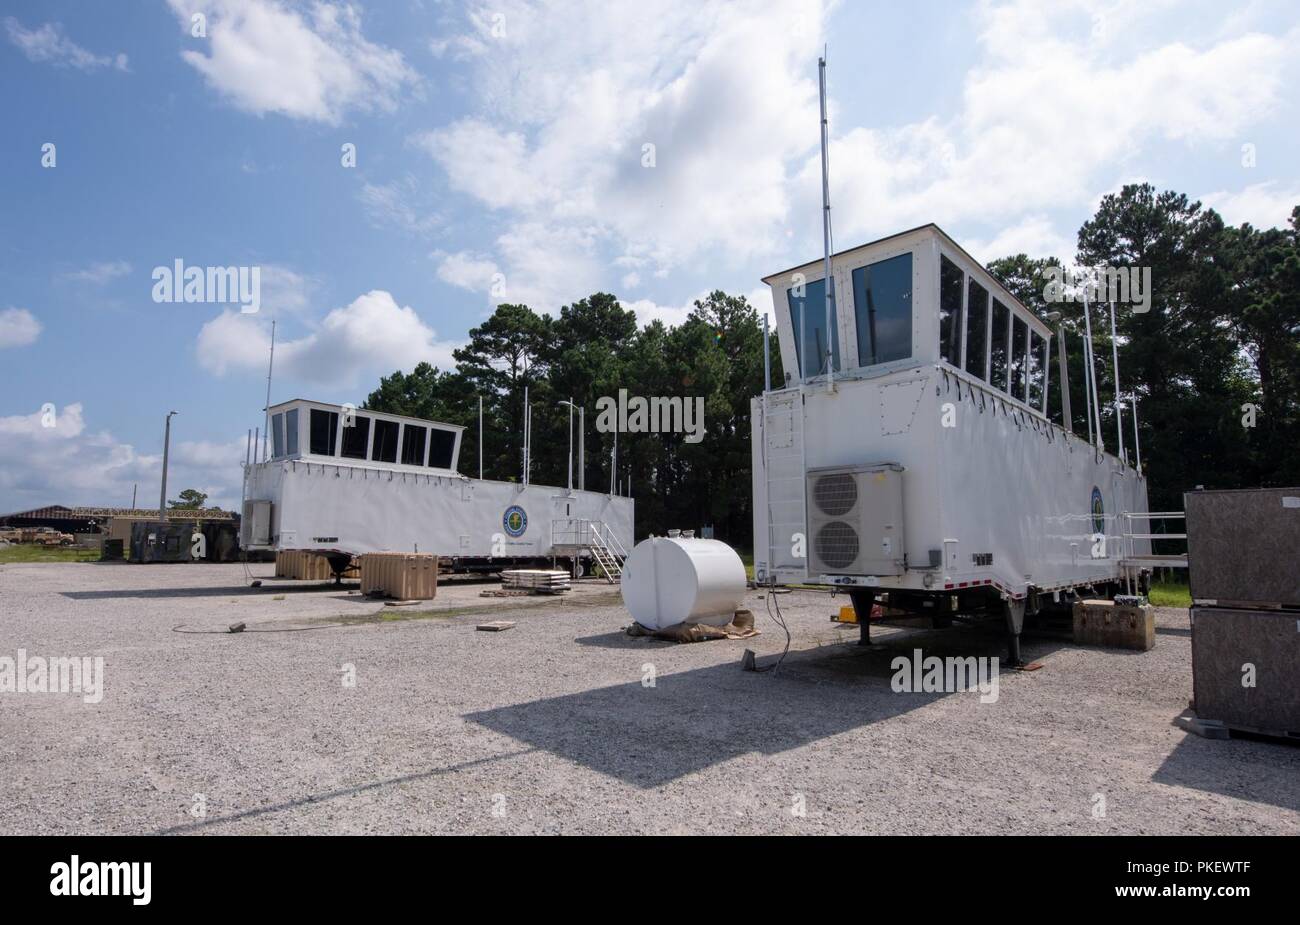 Charleston, S.C. (26 July, 2018) Newly designed Large Mobile Air Traffic Control Towers (LMATCT) are staged at the Joint Base Charleston - Weapons Station in preparation for final inspections and electronics testing by Space and Naval Warfare Systems Center (SSC) Atlantic engineers and Federal Aviation Administration officials. Members from SSC Atlantic were asked by the FAA to provide the integration and engineering support for upgrading the LMATCTs due to their extensive background in deployable control centers. Stock Photo